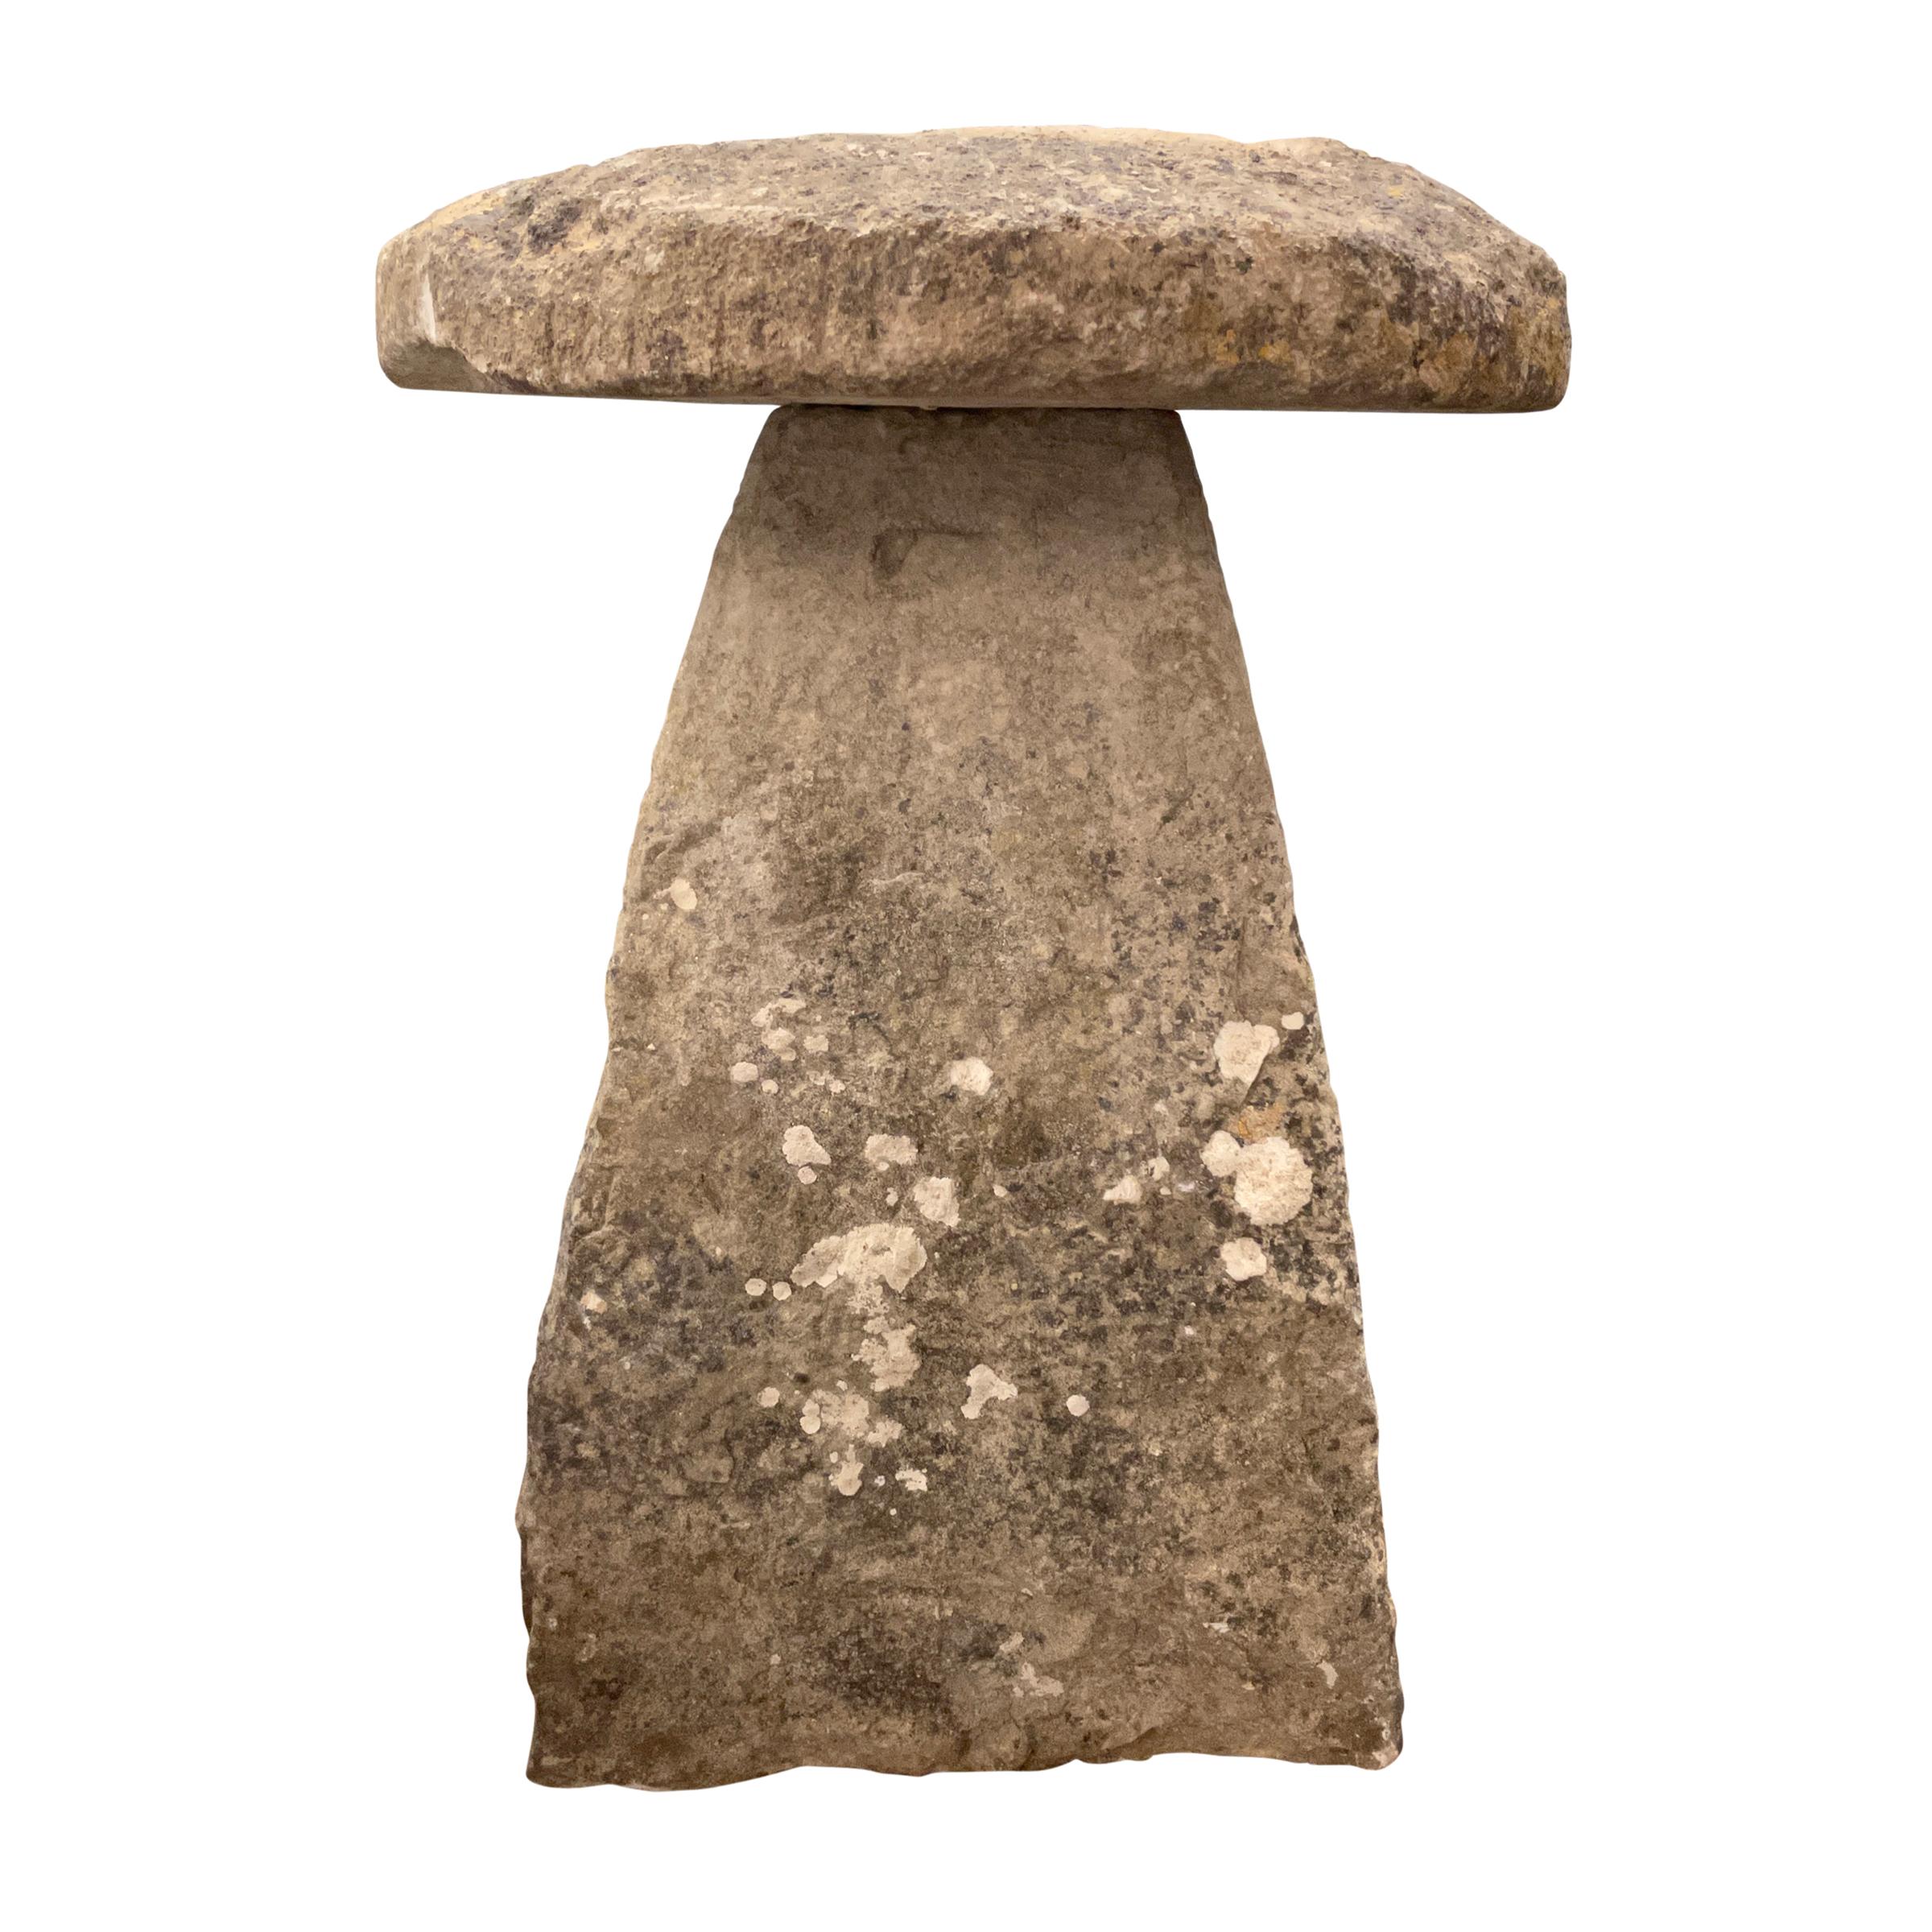 staddle stones for sale